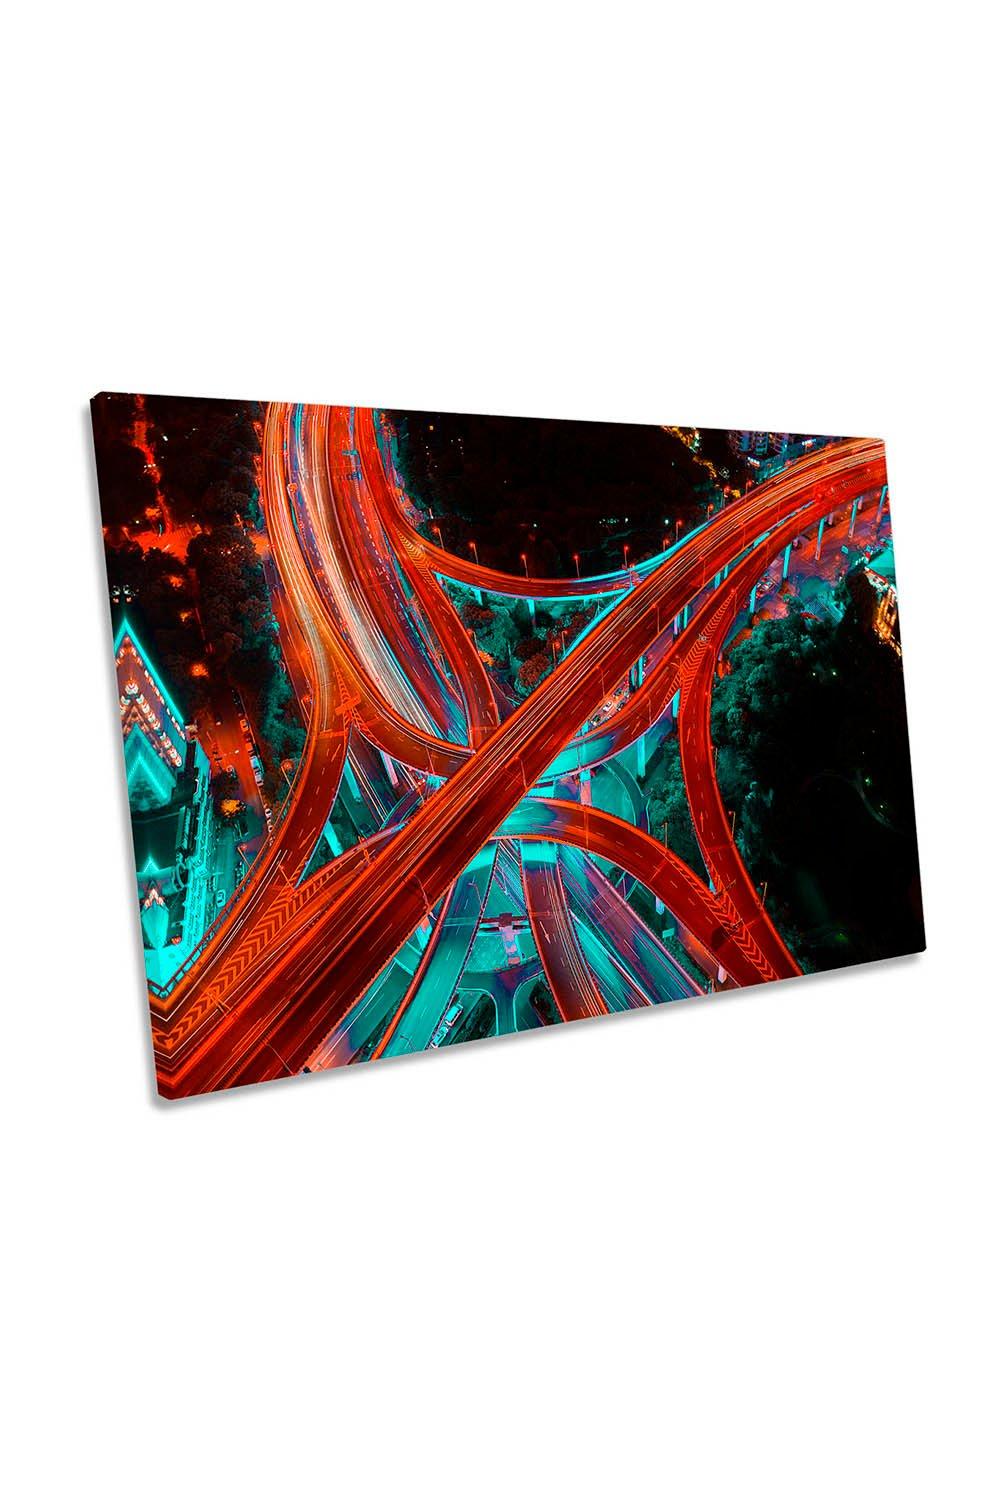 Red Blood Veins Urban Traffic City Canvas Wall Art Picture Print